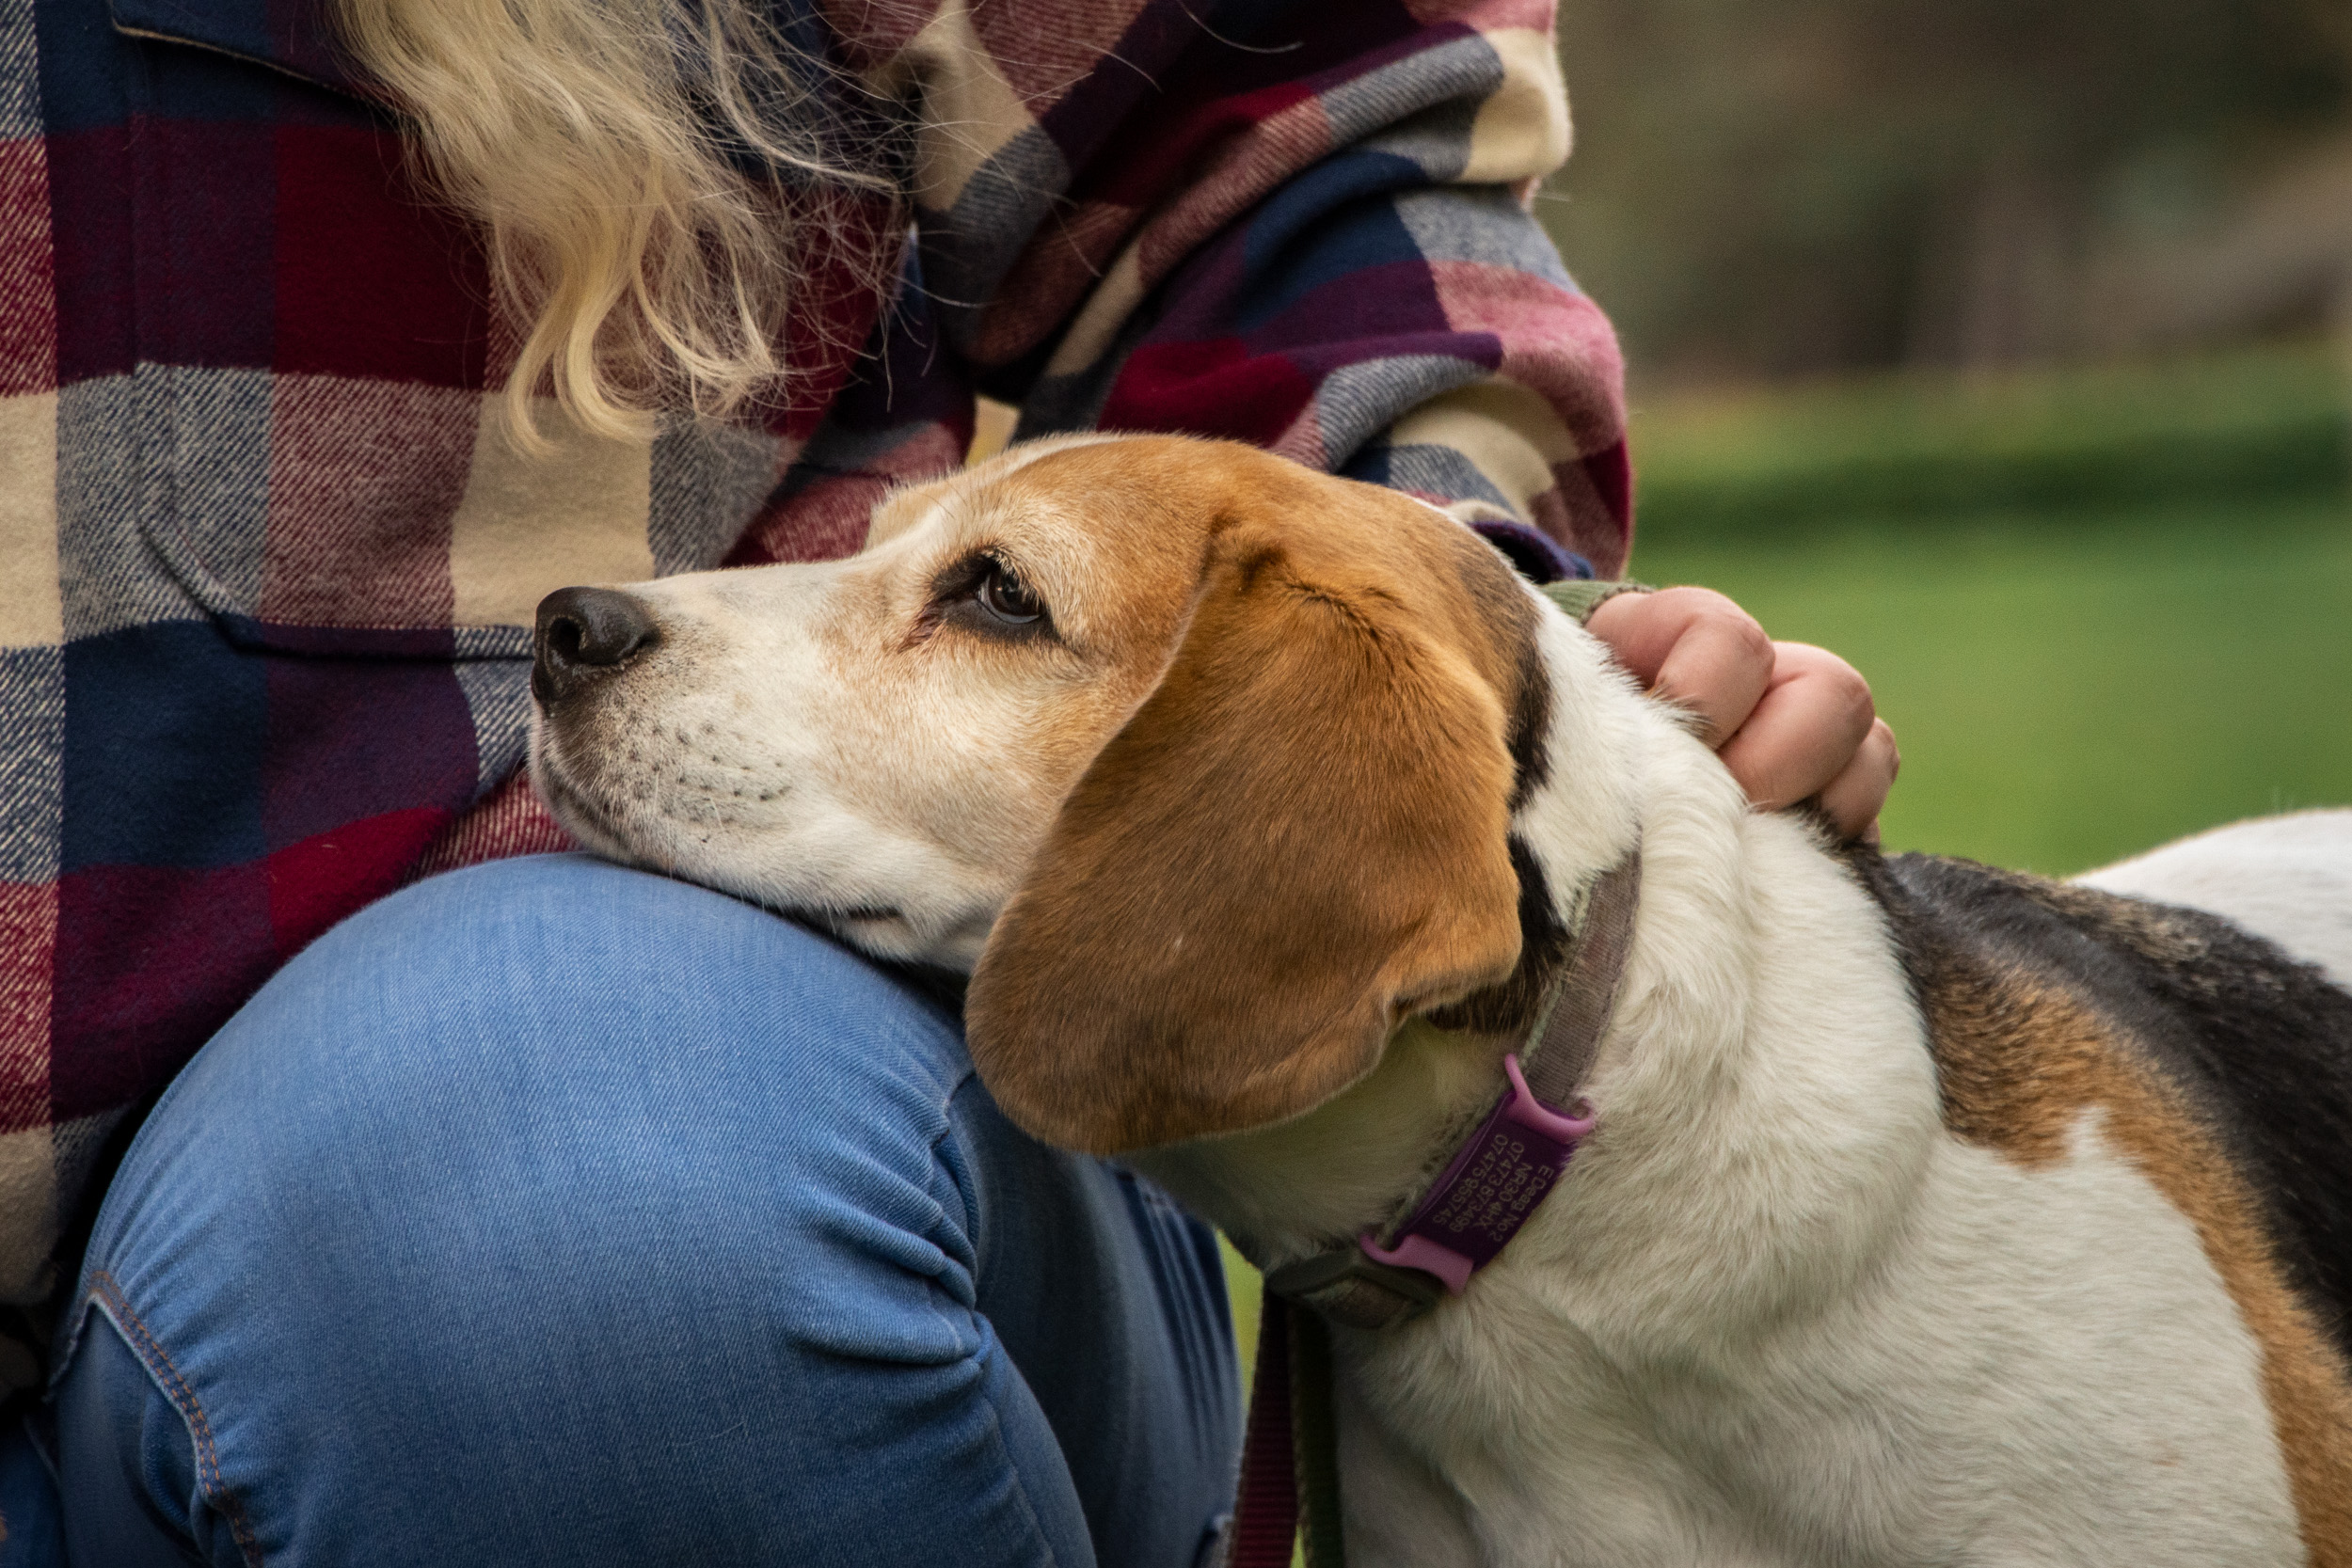 Photograph by Charlotte Hutchins showing a Beagle dog resting her chin on her owner's knee